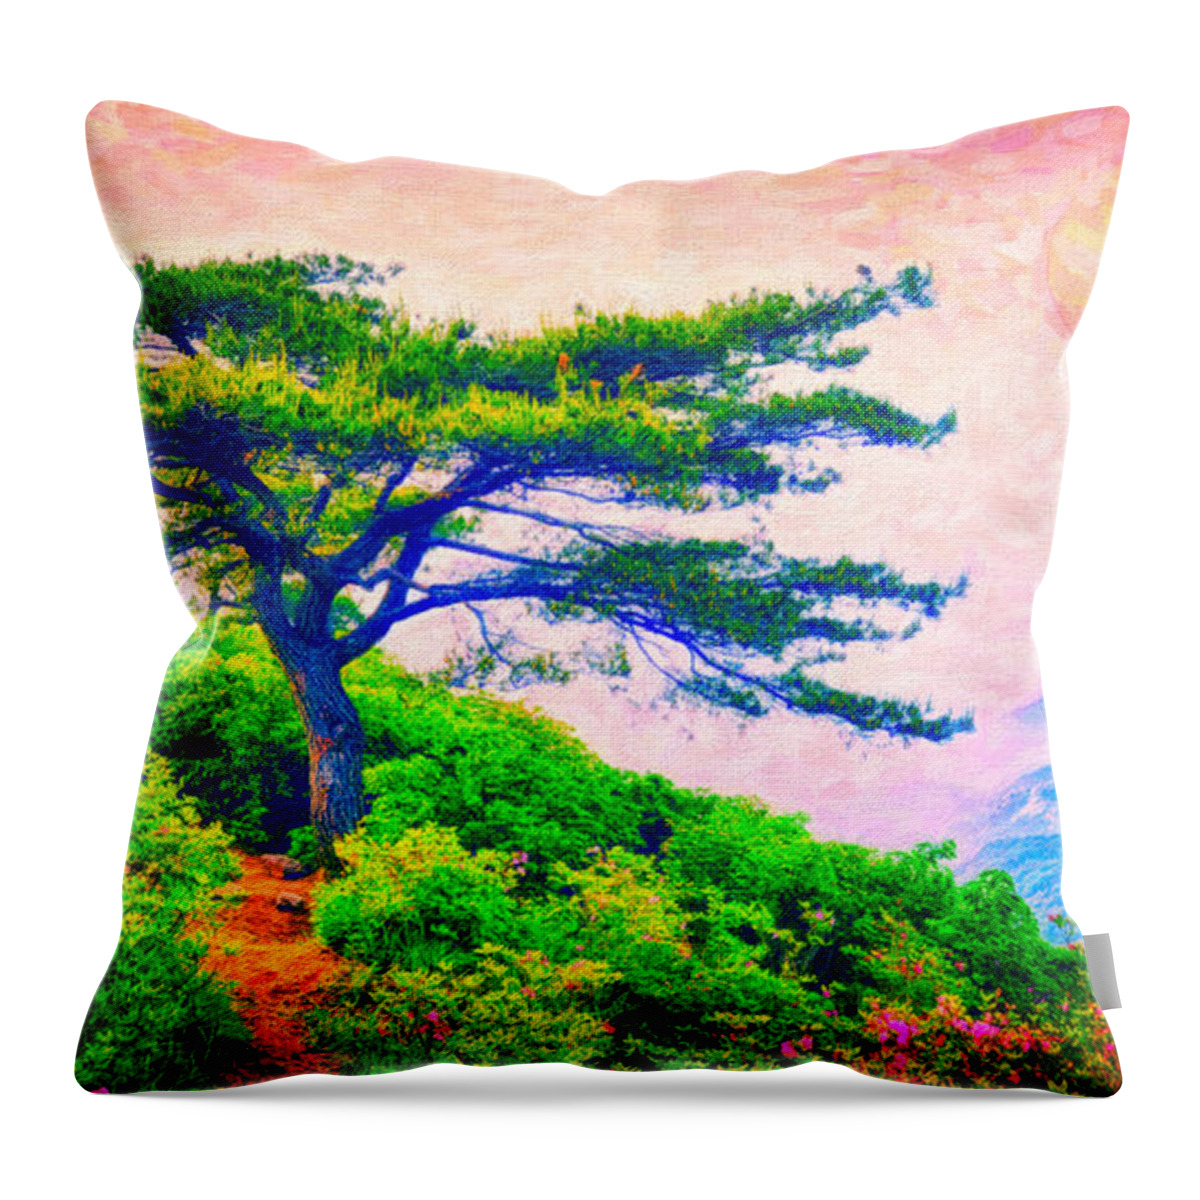 Highland Path Throw Pillow featuring the painting Highland Path by MotionAge Designs